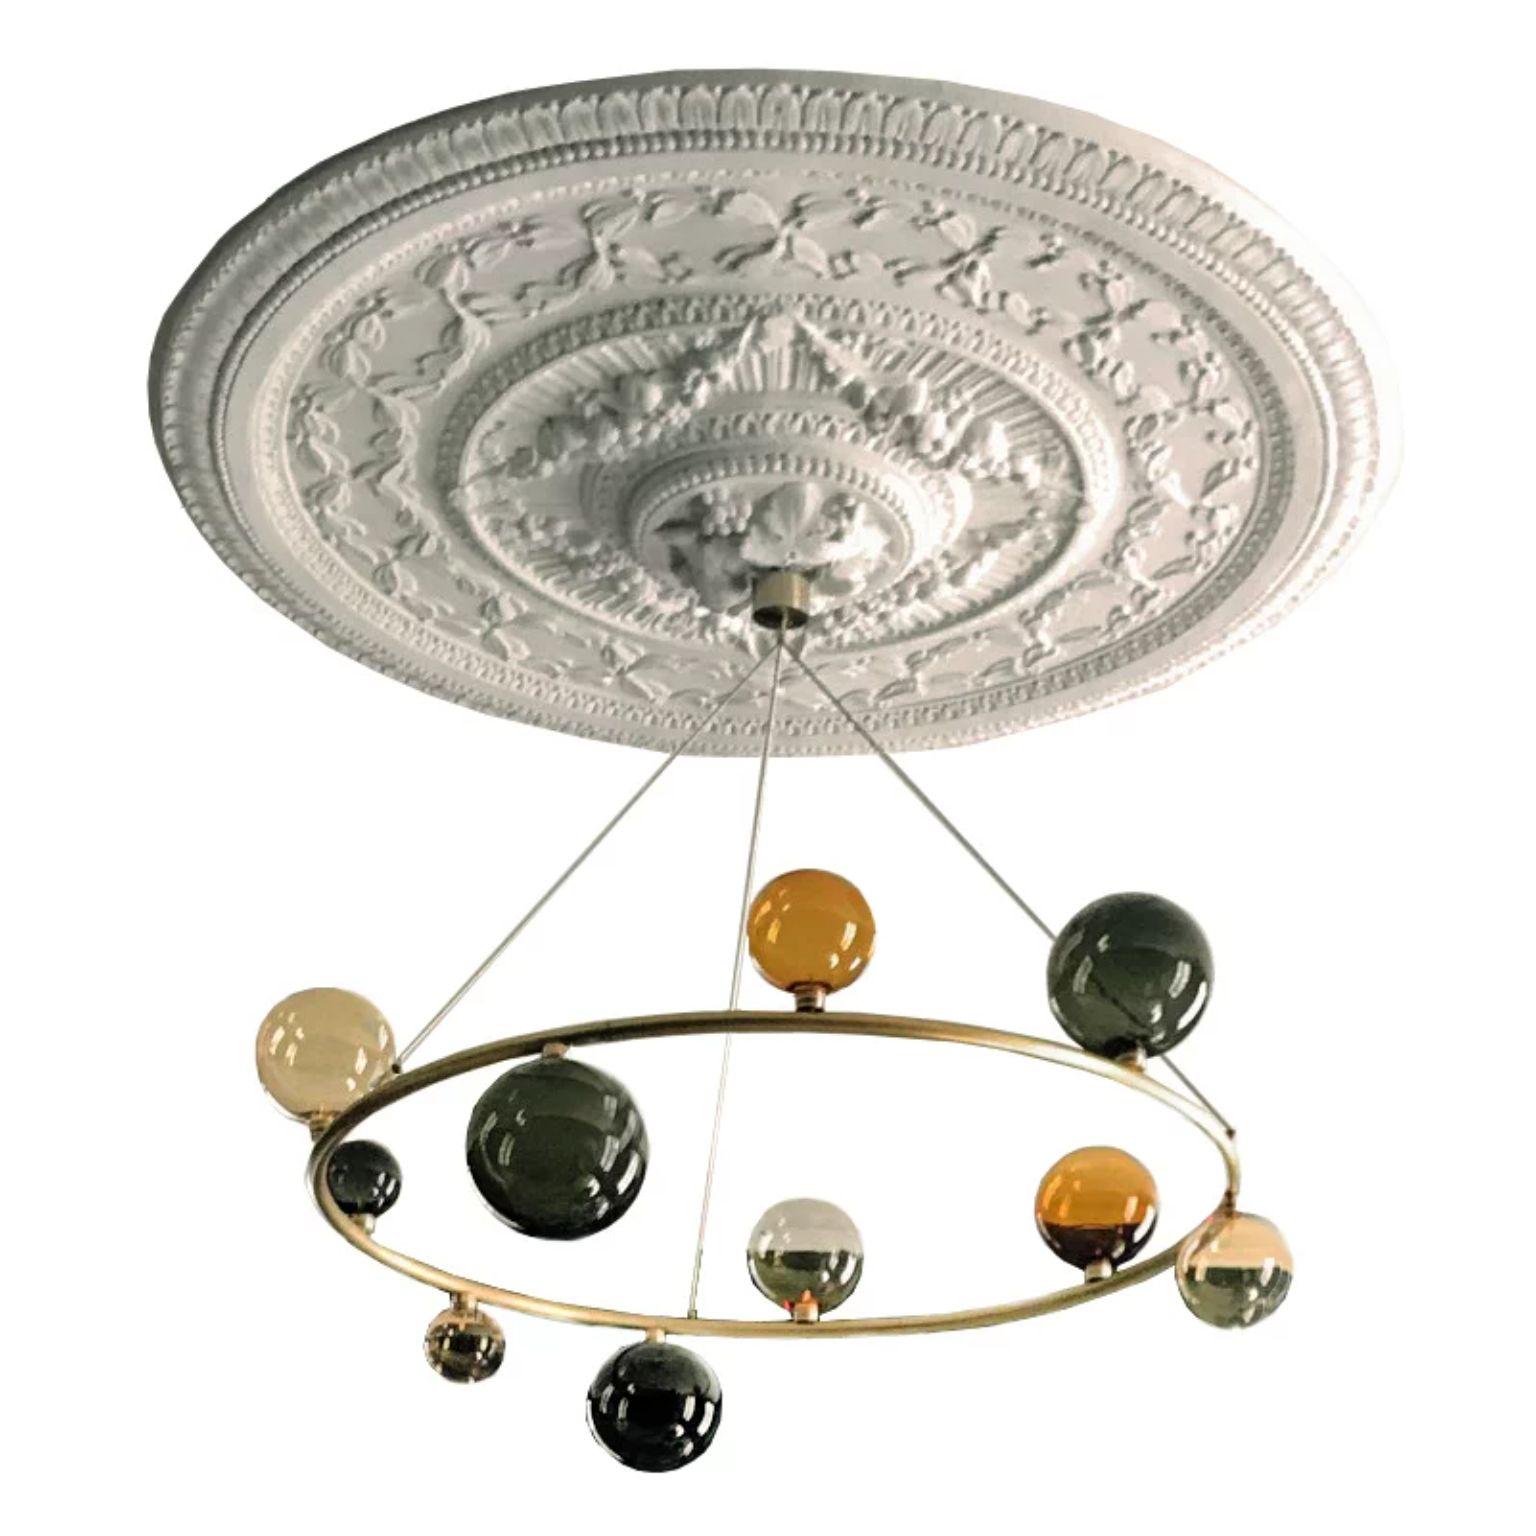 Cosmos ceiling lighting by Emilie Lemardeley
Dimensions: D110 x H70 cm
Materials: Brushed brass, 10 glass spheres.
Weight: 15 kg

The cosmos collection references to the old occidental belief that the Earth was the center of the universe.